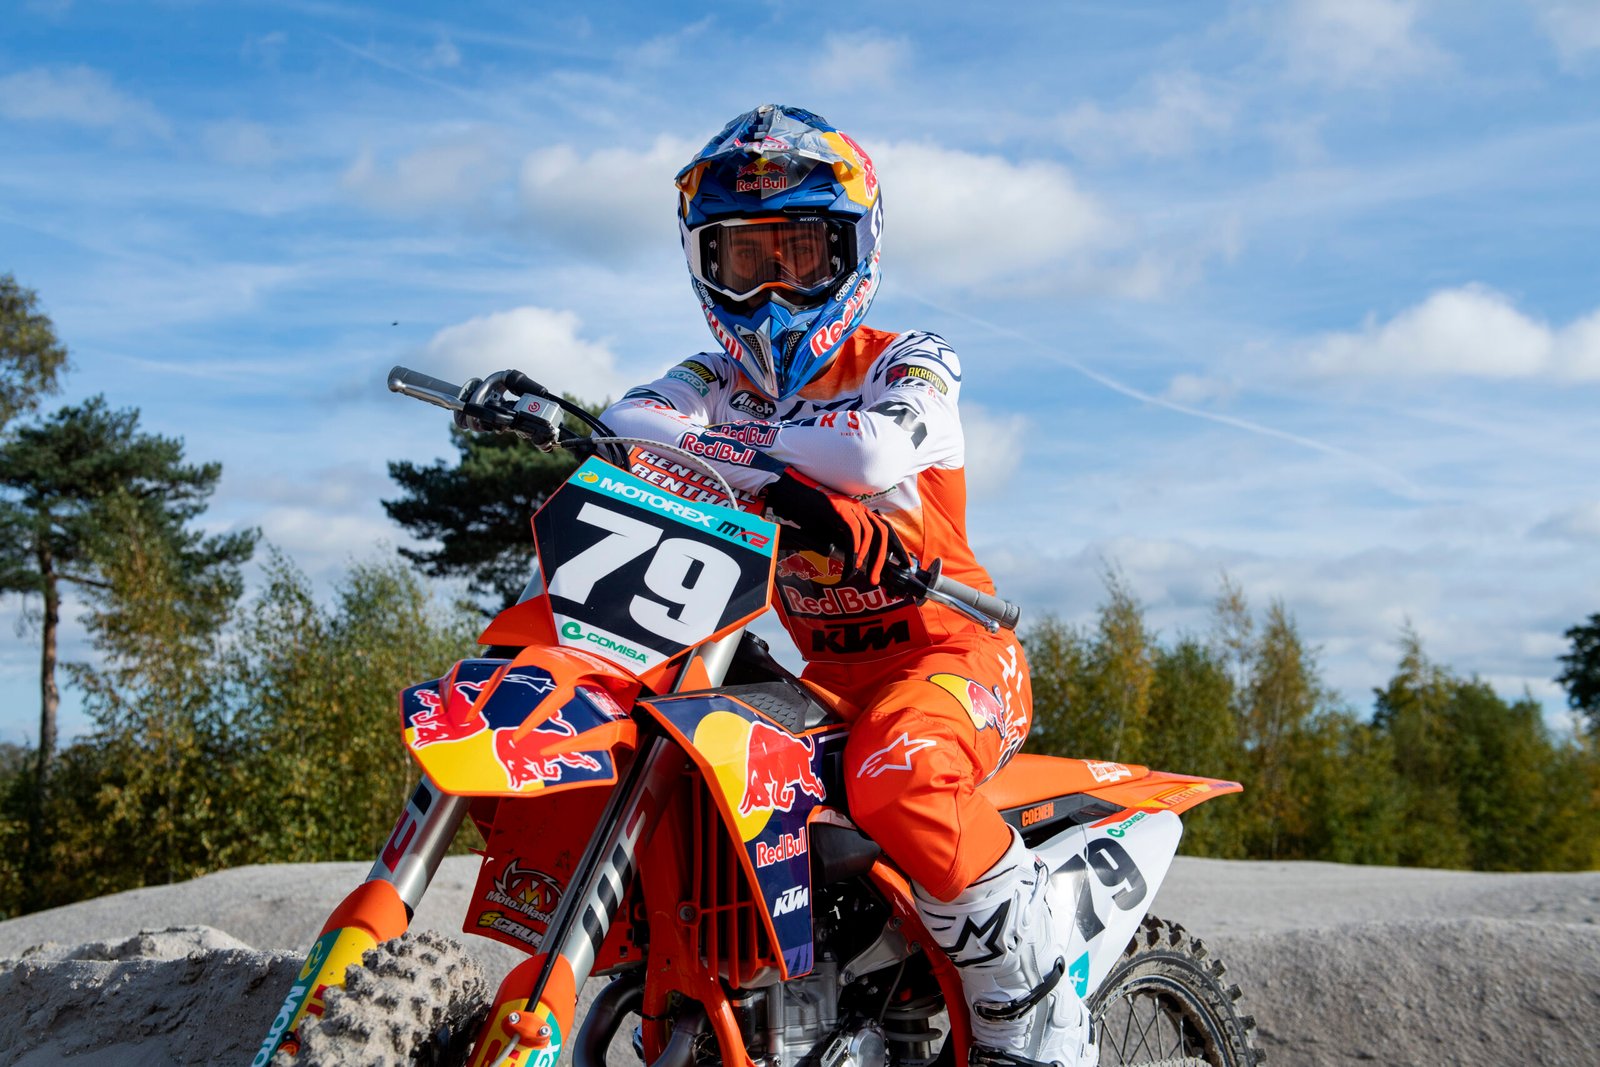 SACHA COENEN TO MAKE FULL-TIME MX2 DEBUT WITH RED BULL KTM FACTORY RACING